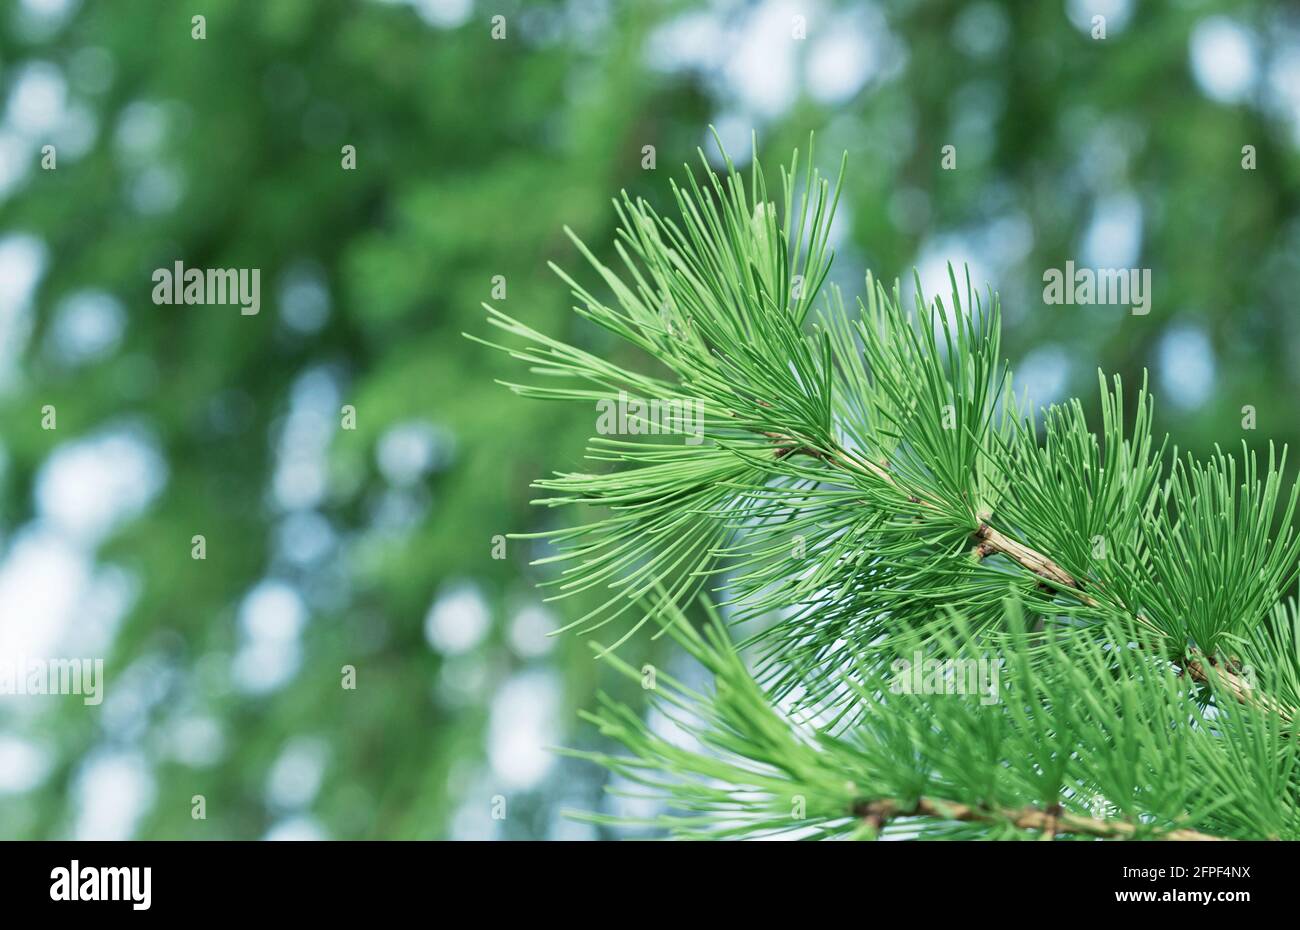 Branch with young shoots of Siberian larch from the pine family. Stock Photo